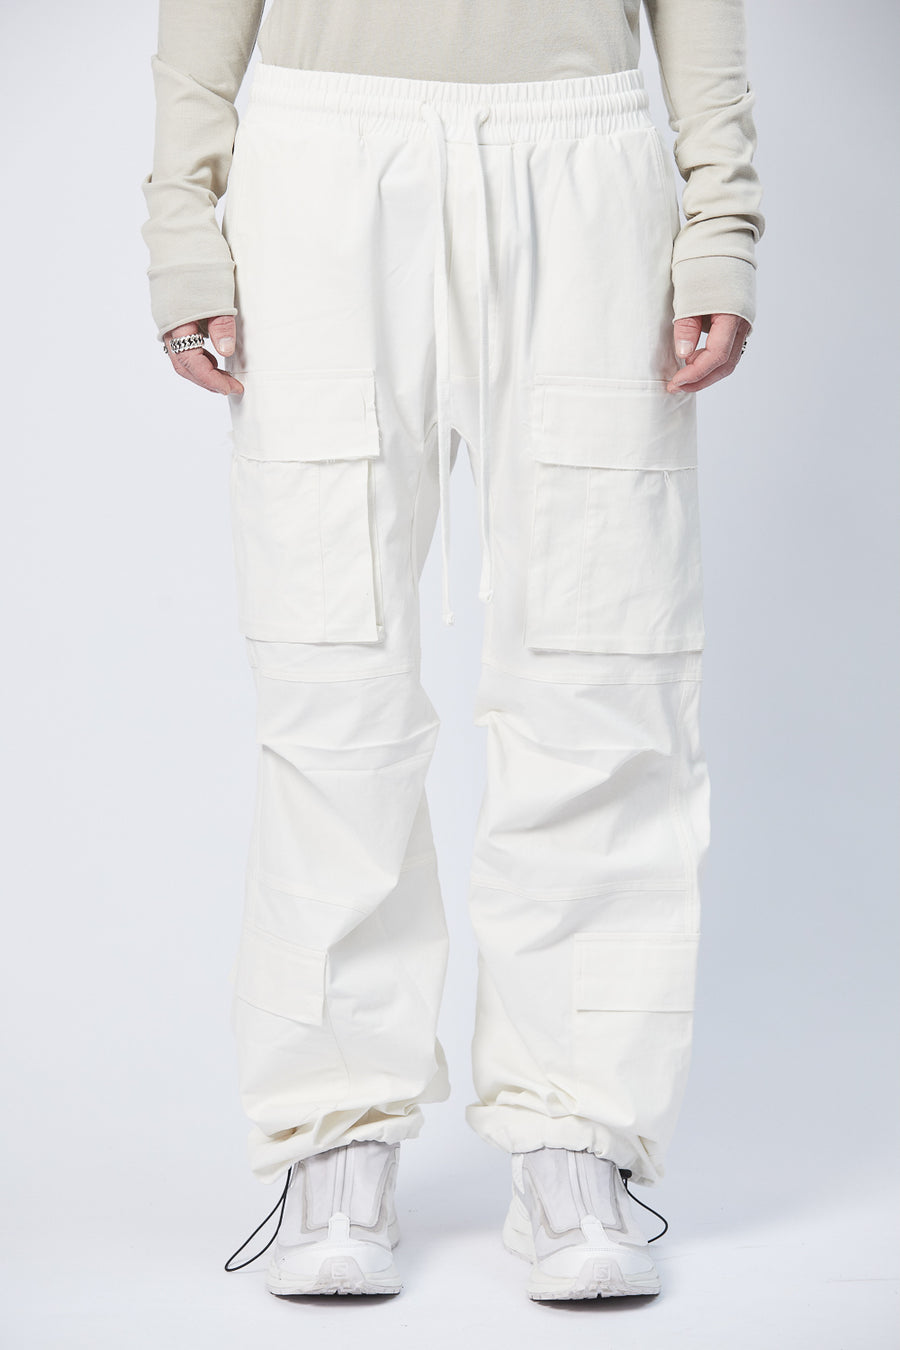 Buy the Thom Krom M ST 441 Sweatpants in Cream at Intro. Spend £50 for free UK delivery. Official stockists. We ship worldwide.